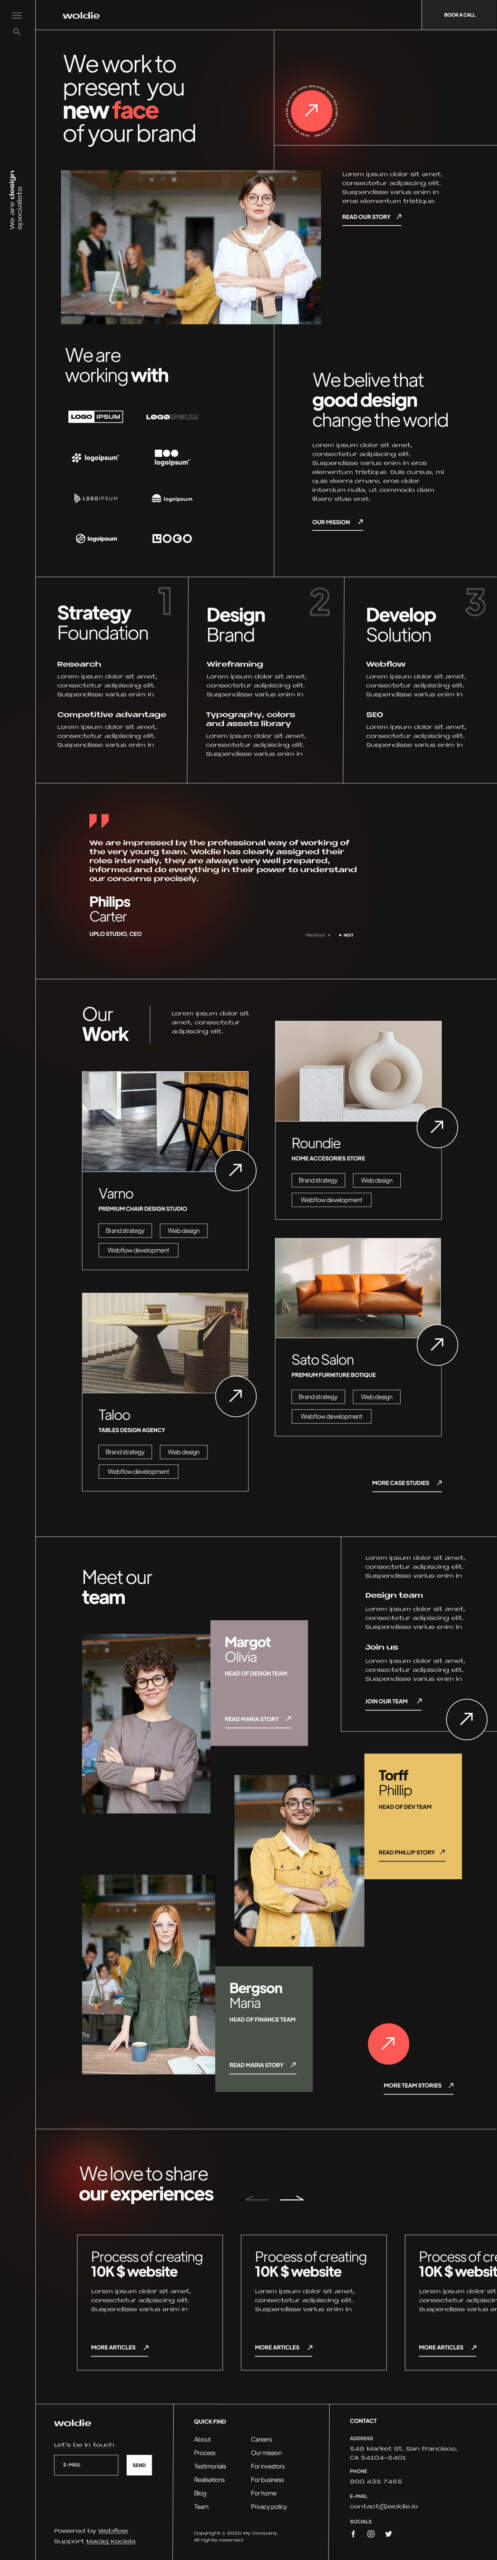 Woldie - Design Agency Landing page Design